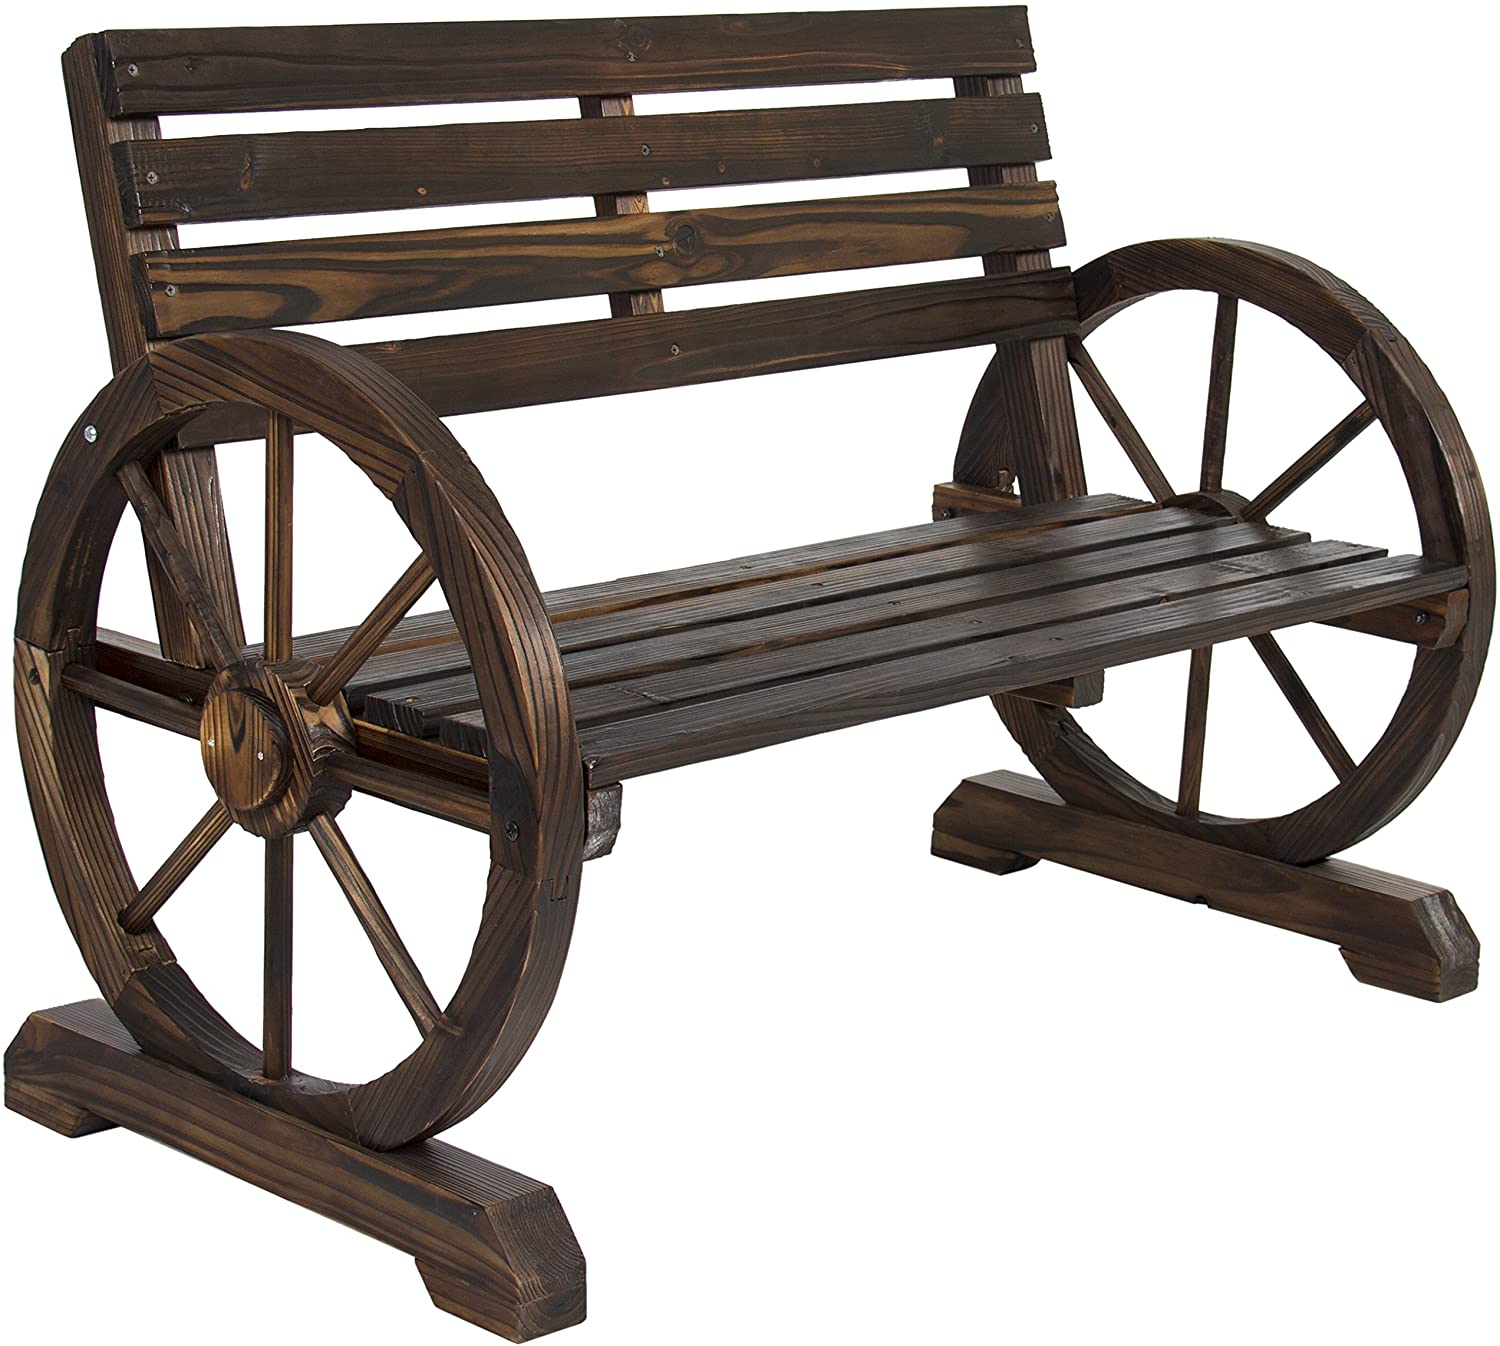 Review of Best Choice Products Wooden Rustic Wagon Wheel Bench for Patio, Garden, Outdoor